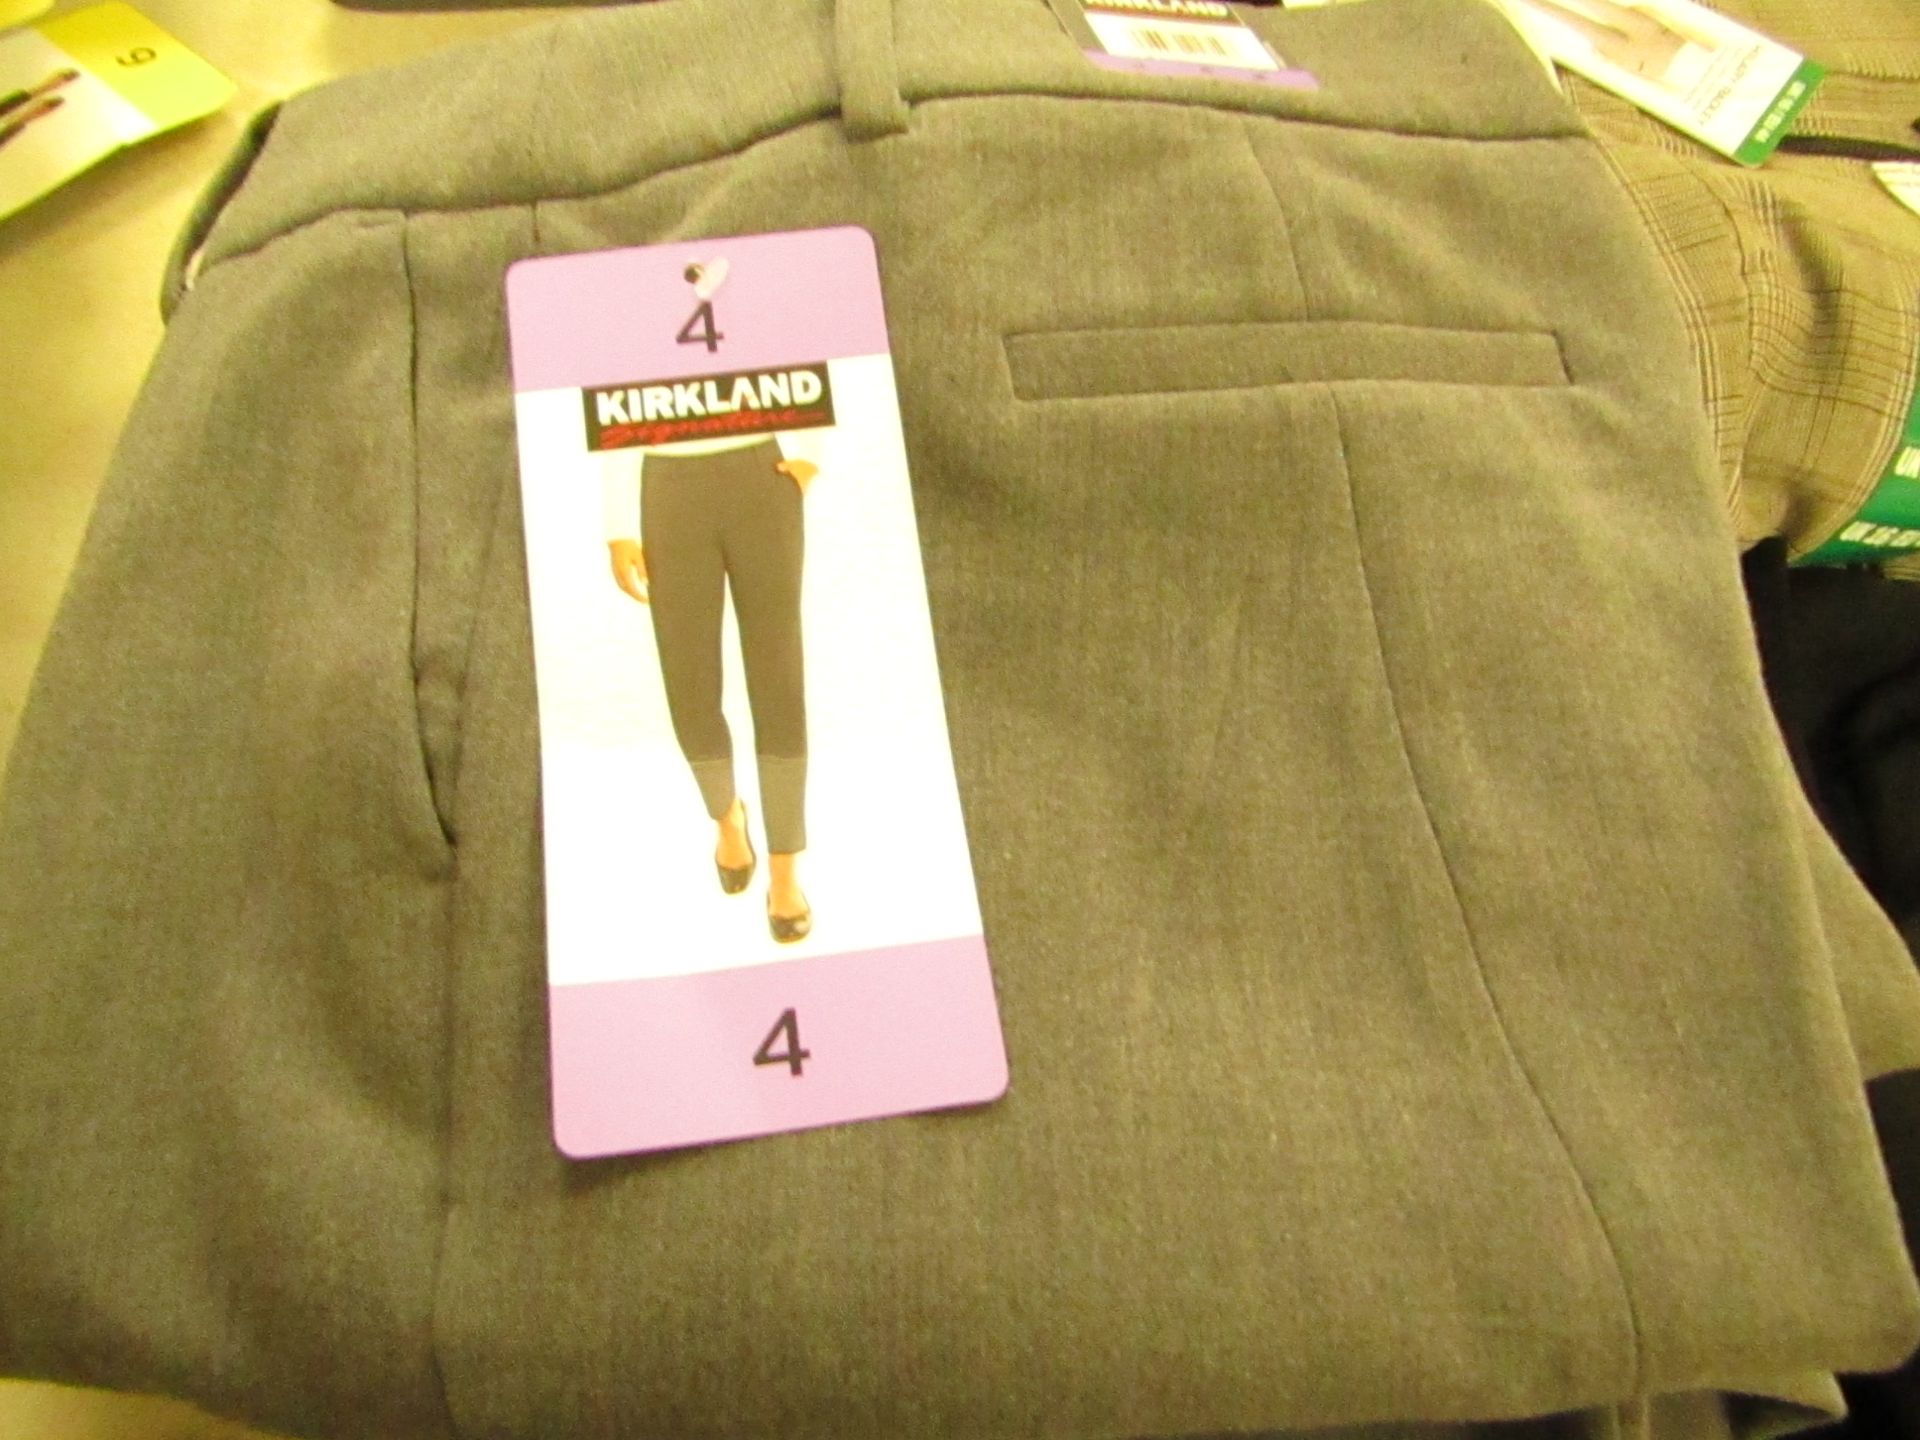 Kirkland Signature Ladies Pants - Size 4 - Grey - New with tags